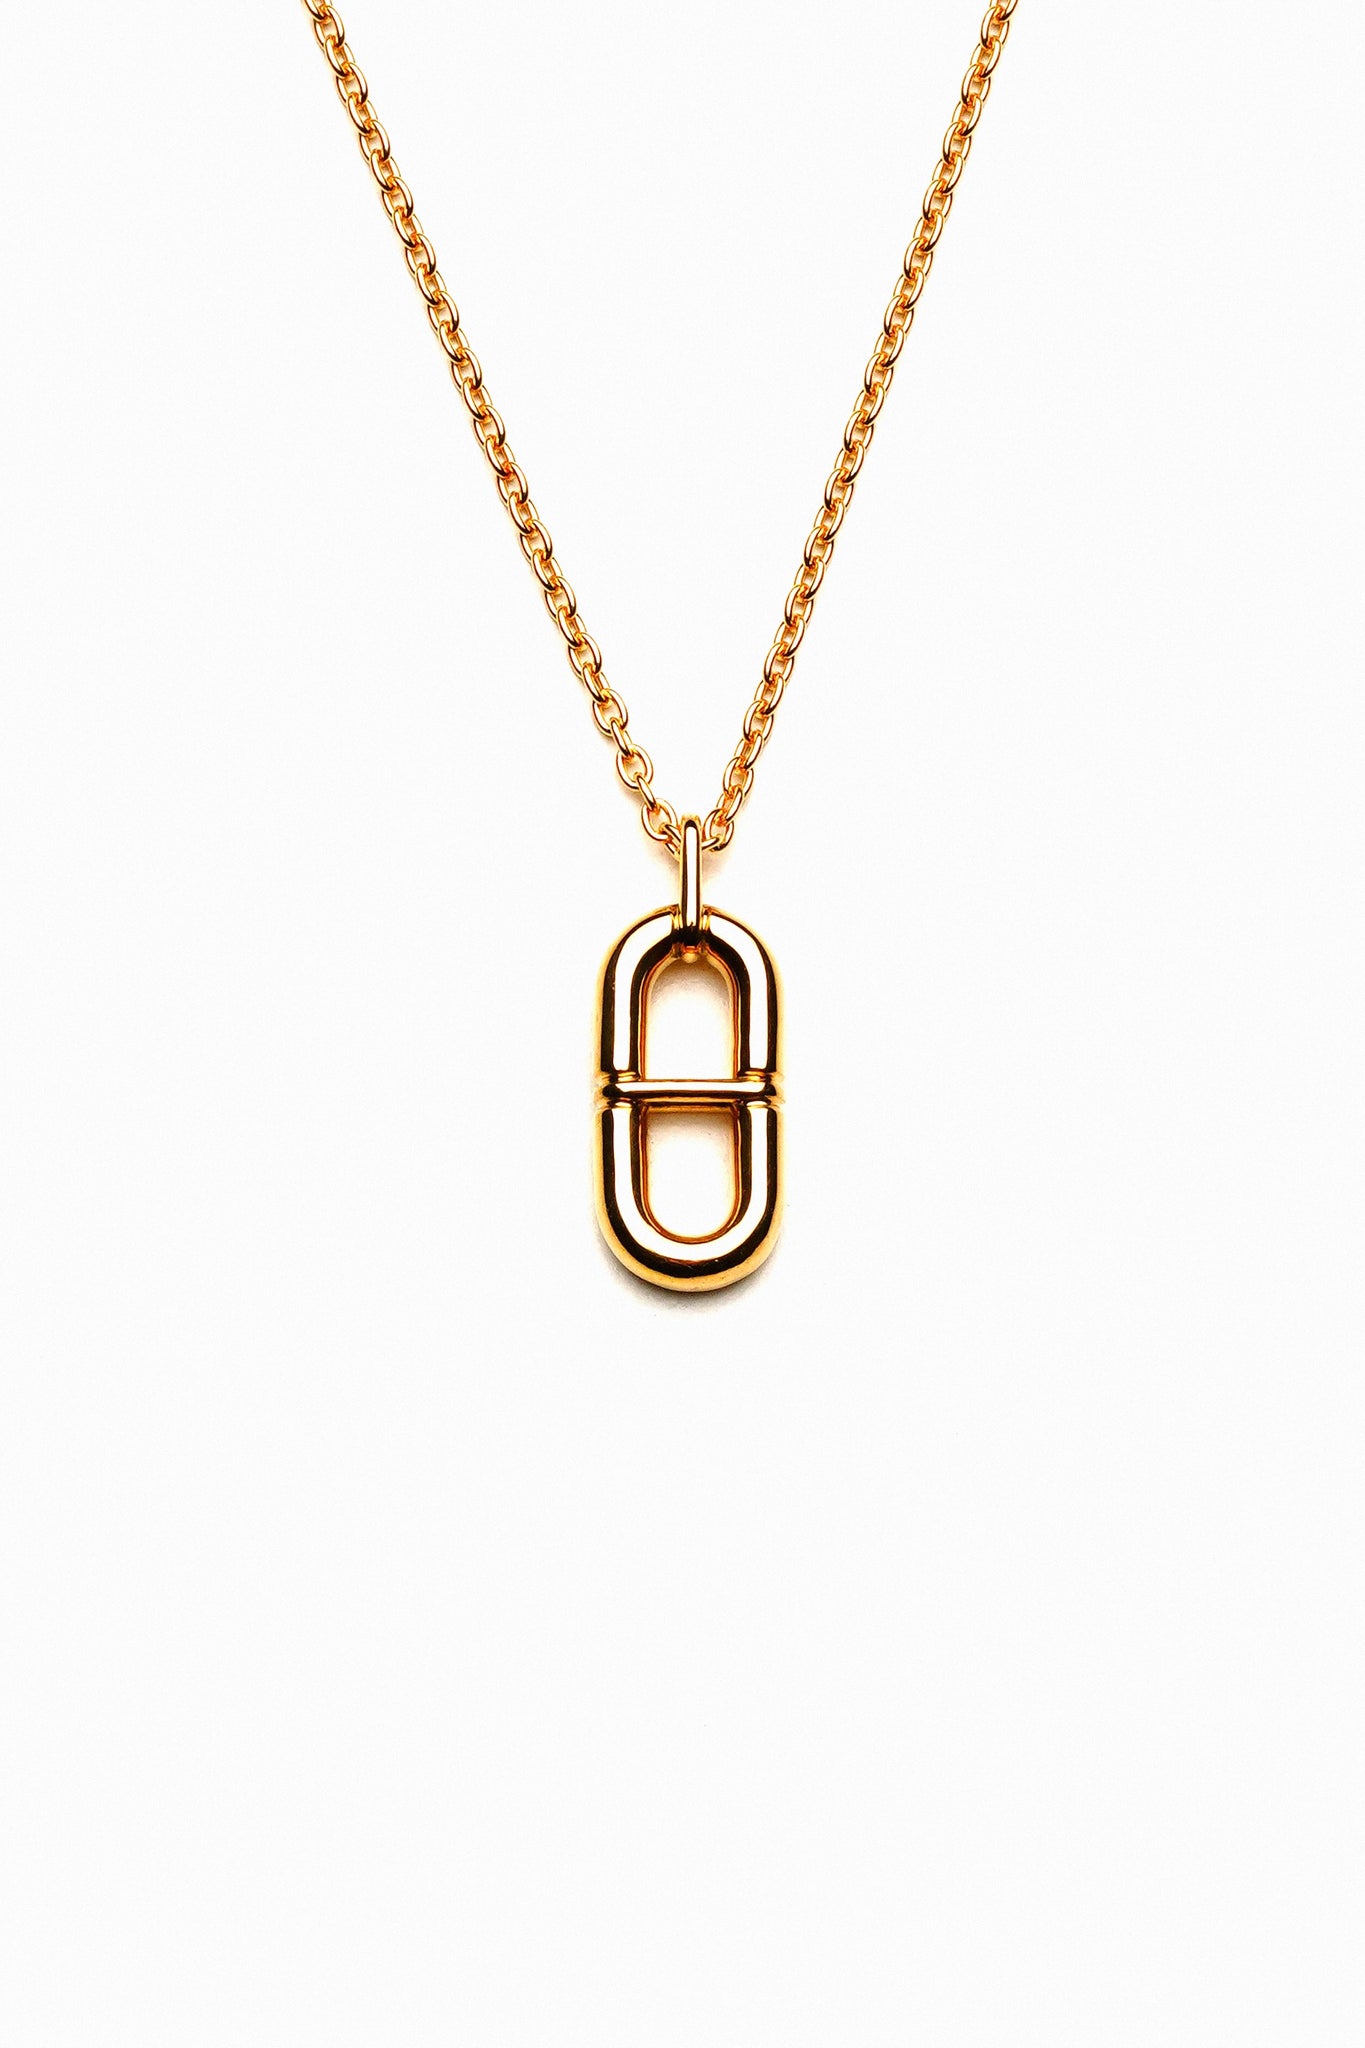 NECKLACE – ISIR OFFICIAL WEBSITE